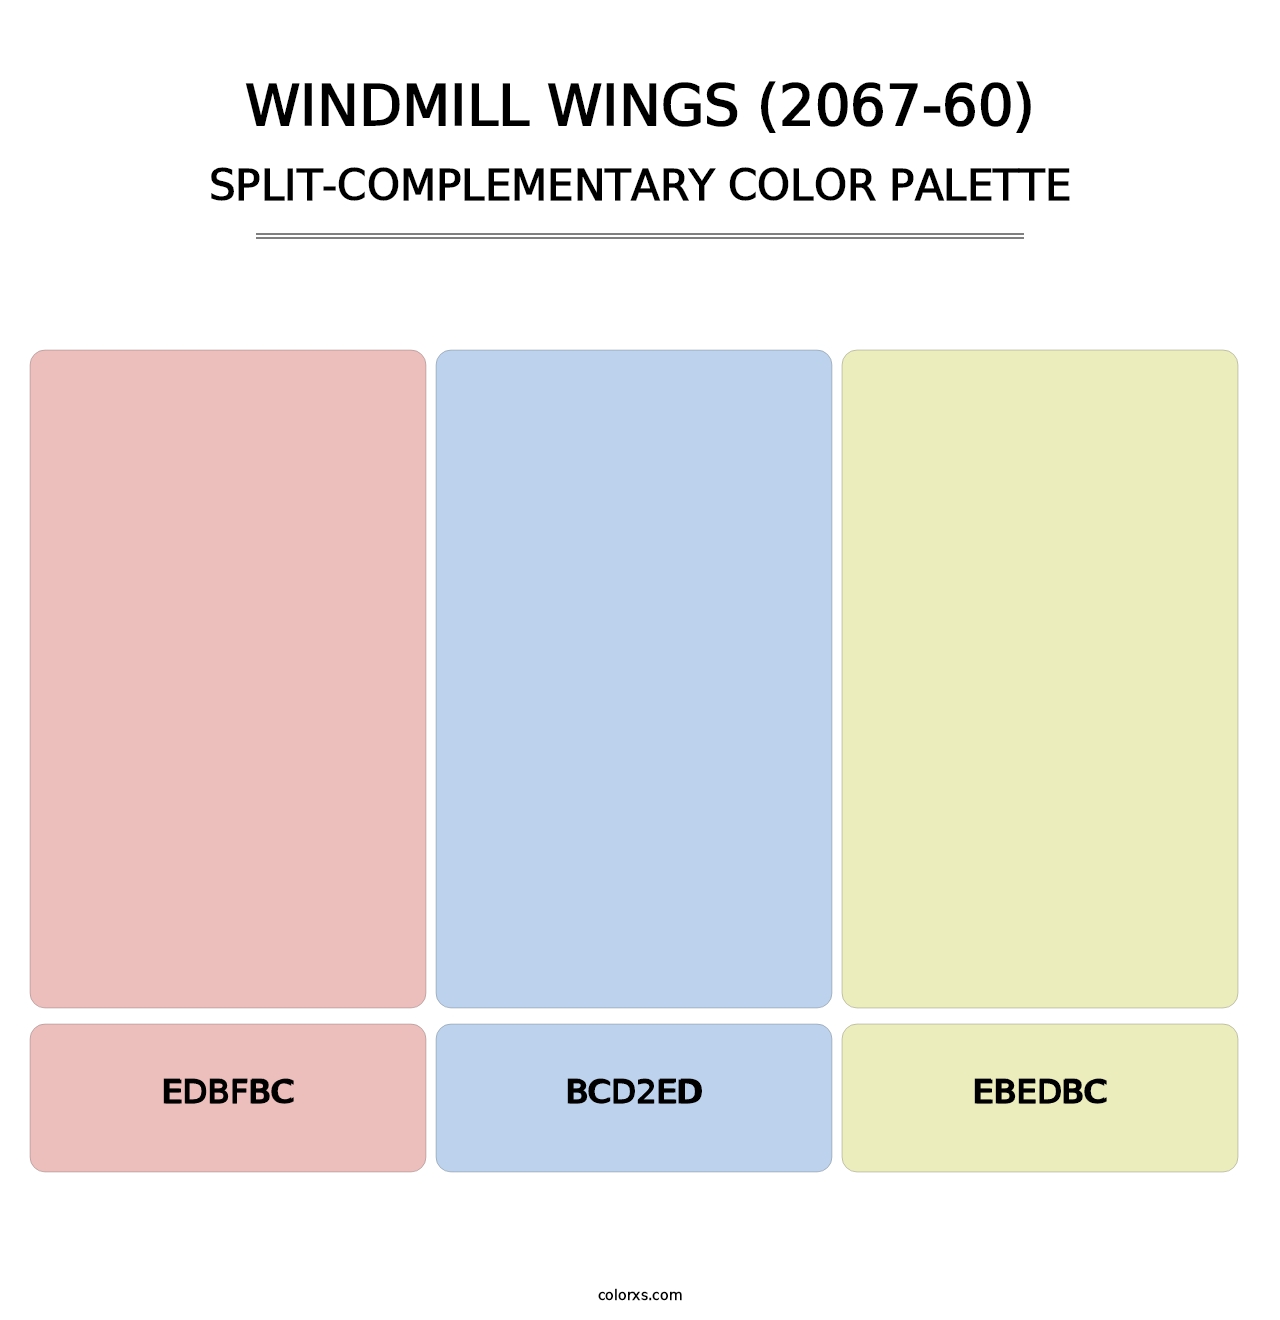 Windmill Wings (2067-60) - Split-Complementary Color Palette